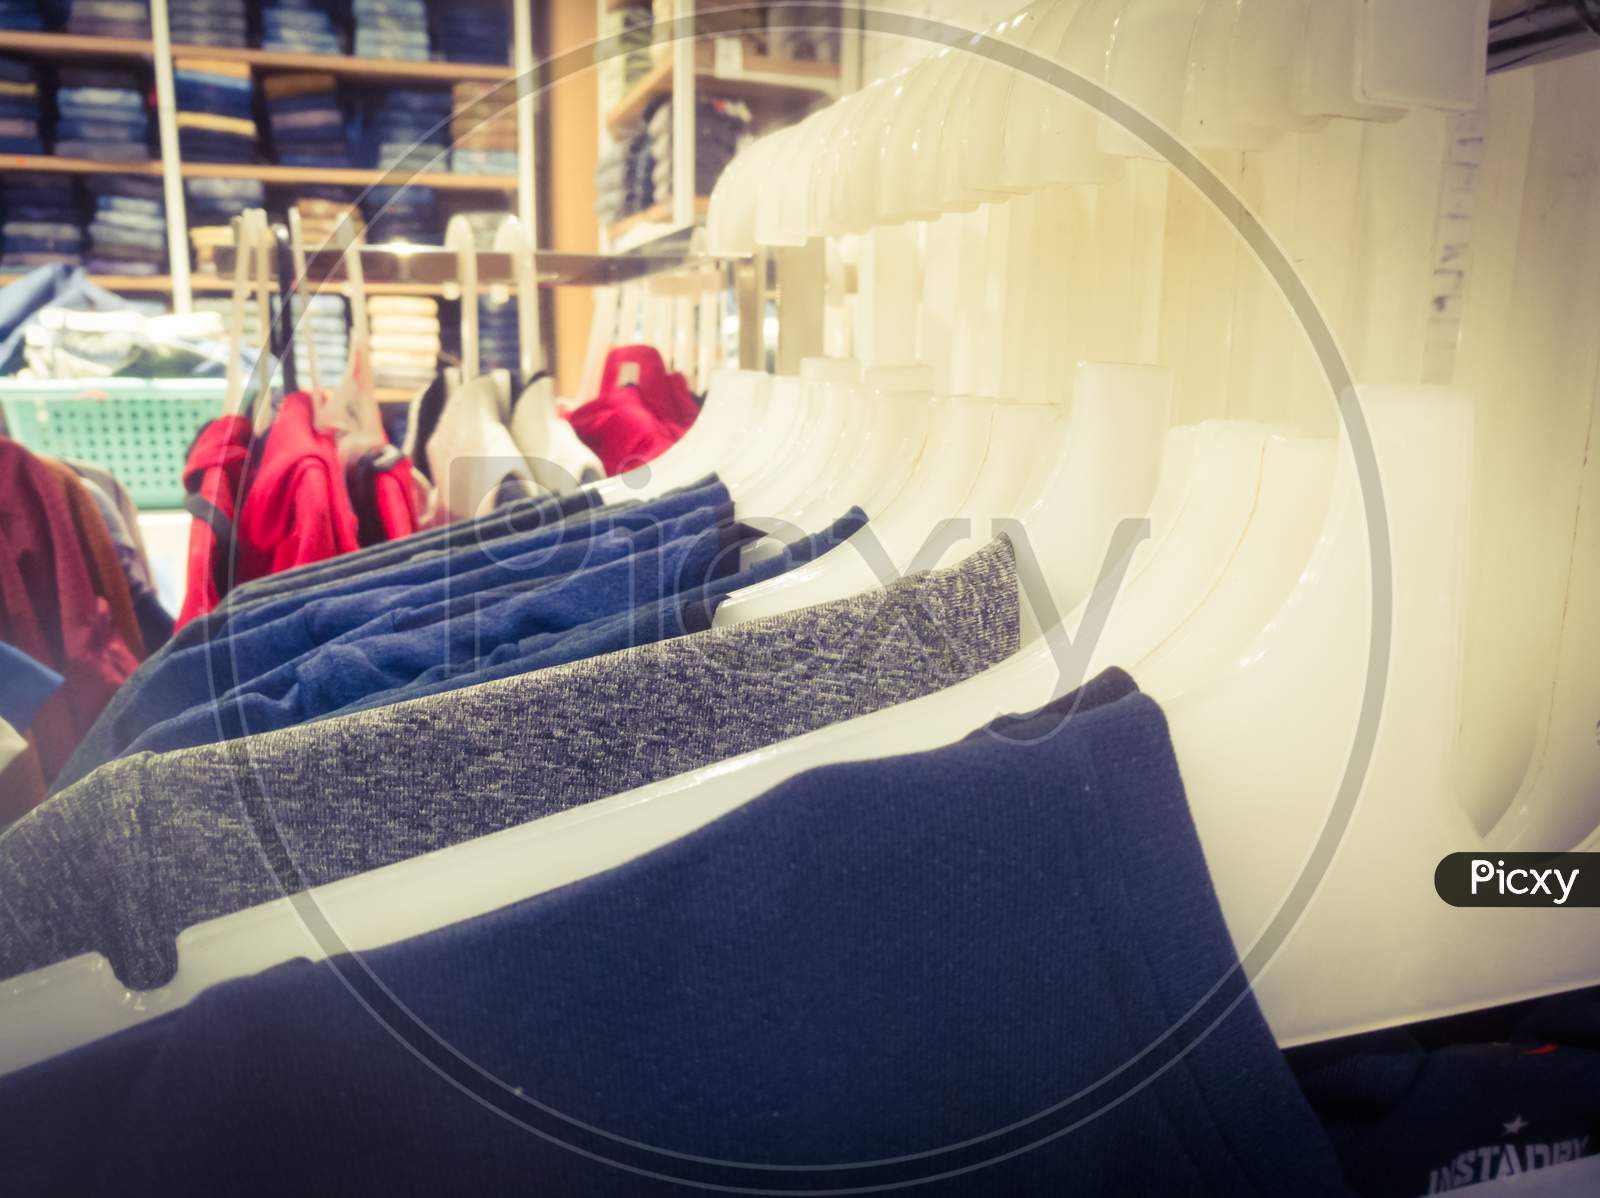 T Shirts In Hangers Are Aligned In An Array Inside A Textile Showroom.